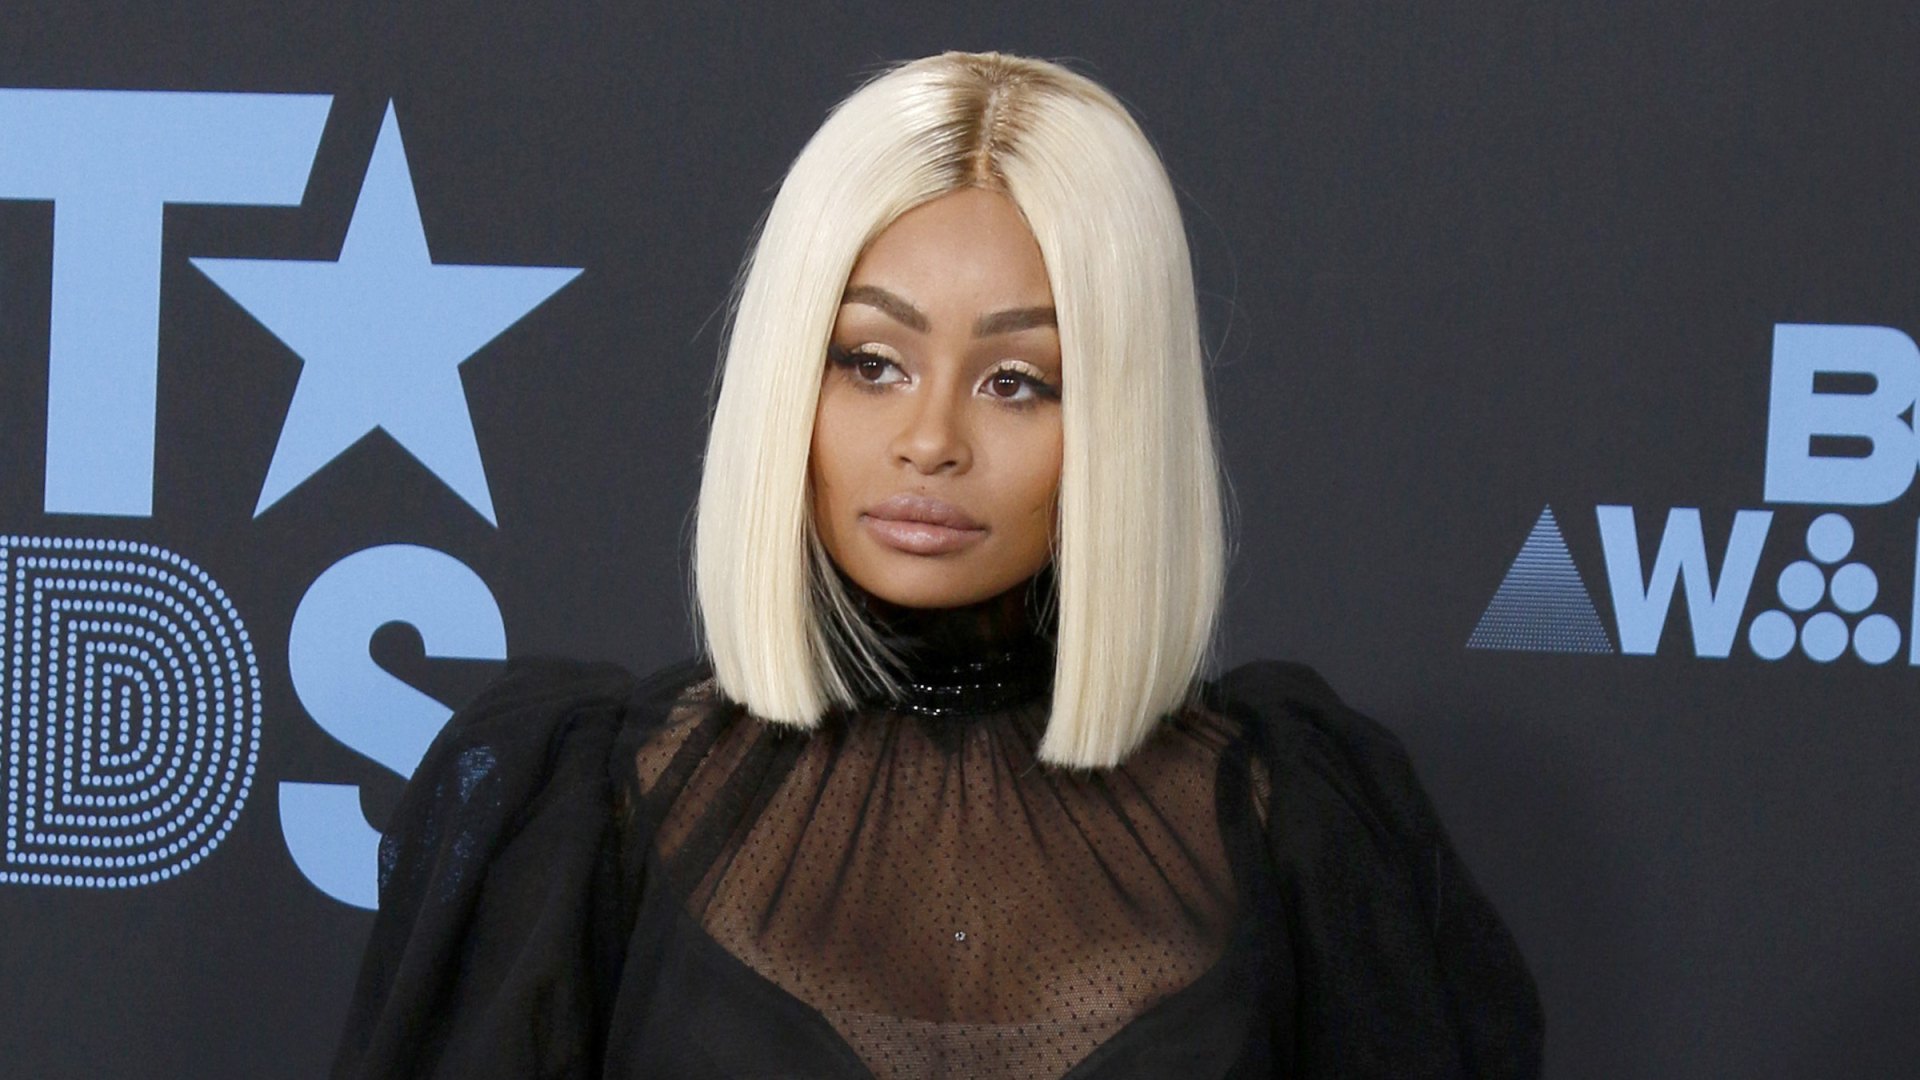 Blac Chyna Net Worth How Does the Model Make Money?